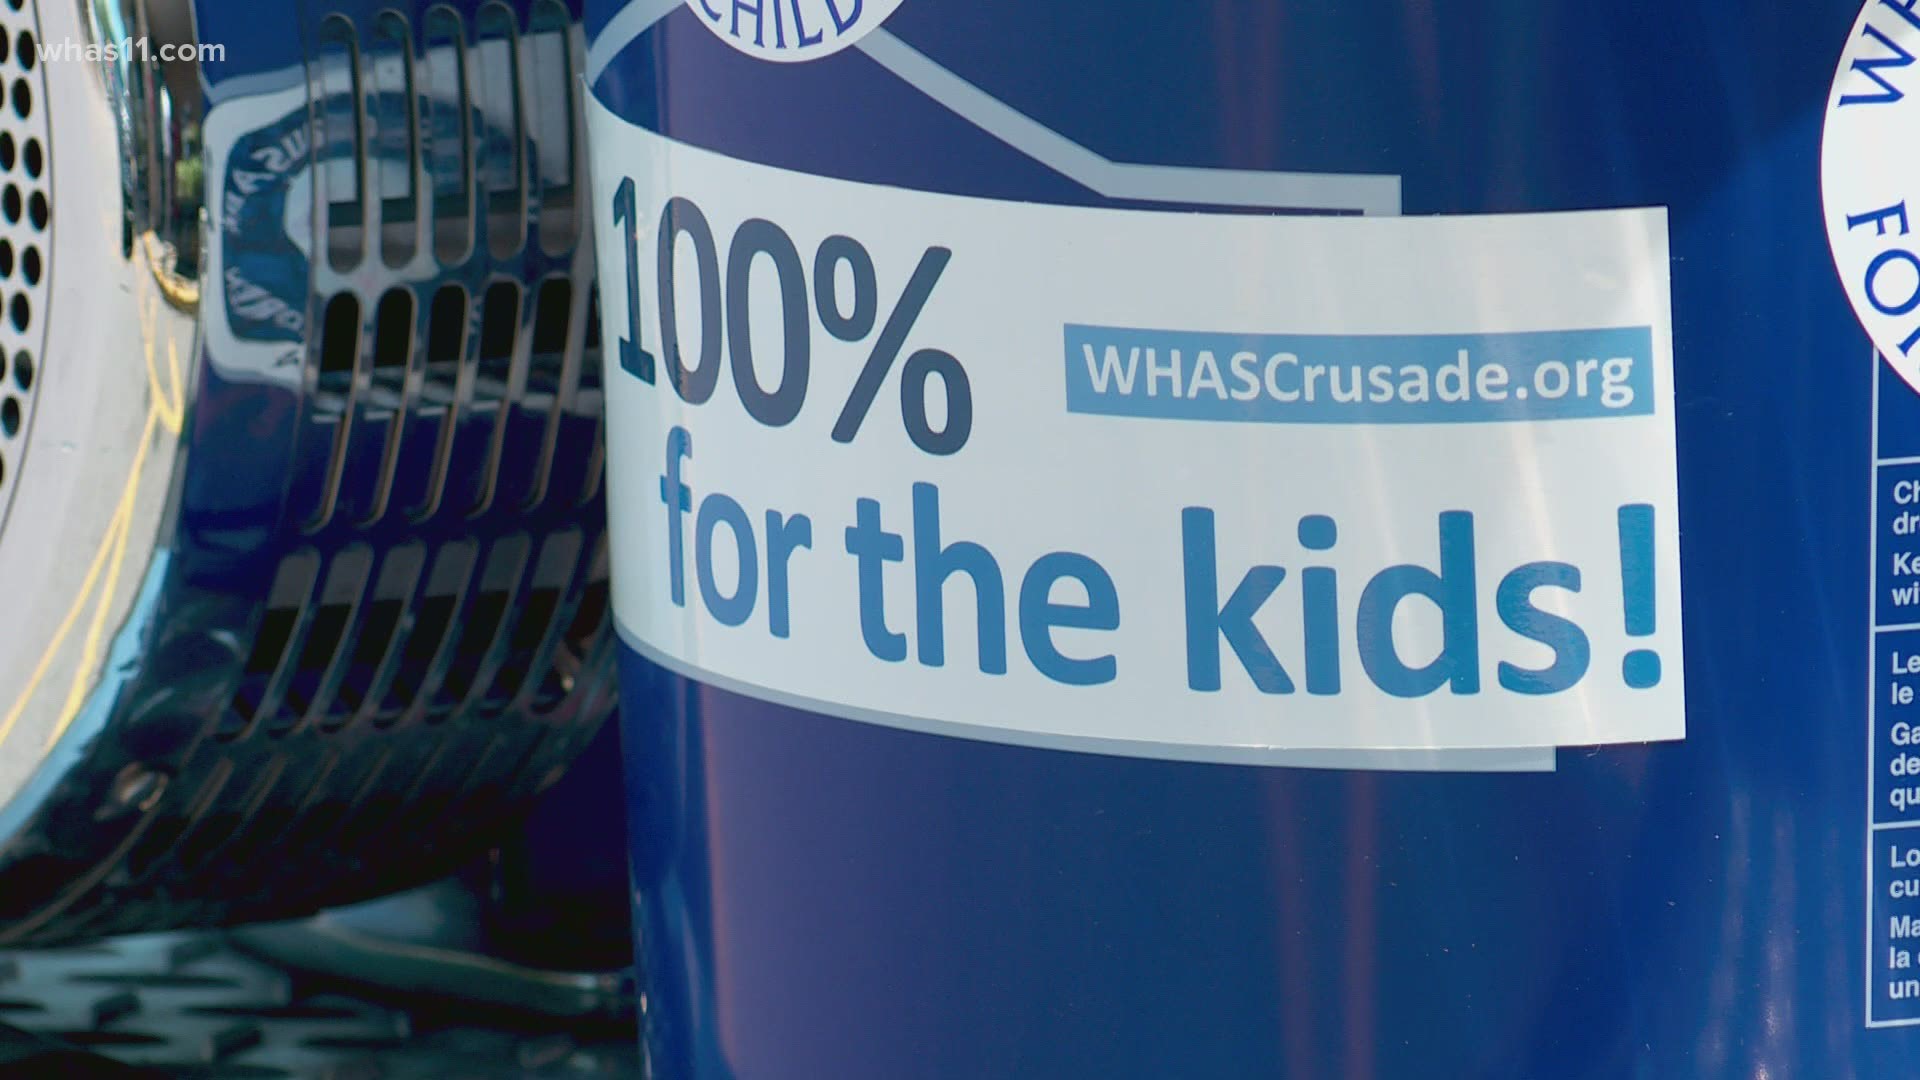 WHAS Crusade has awarded $5.1 million collected this year to agencies, schools and hospitals in Kentucky and Southern Indiana.